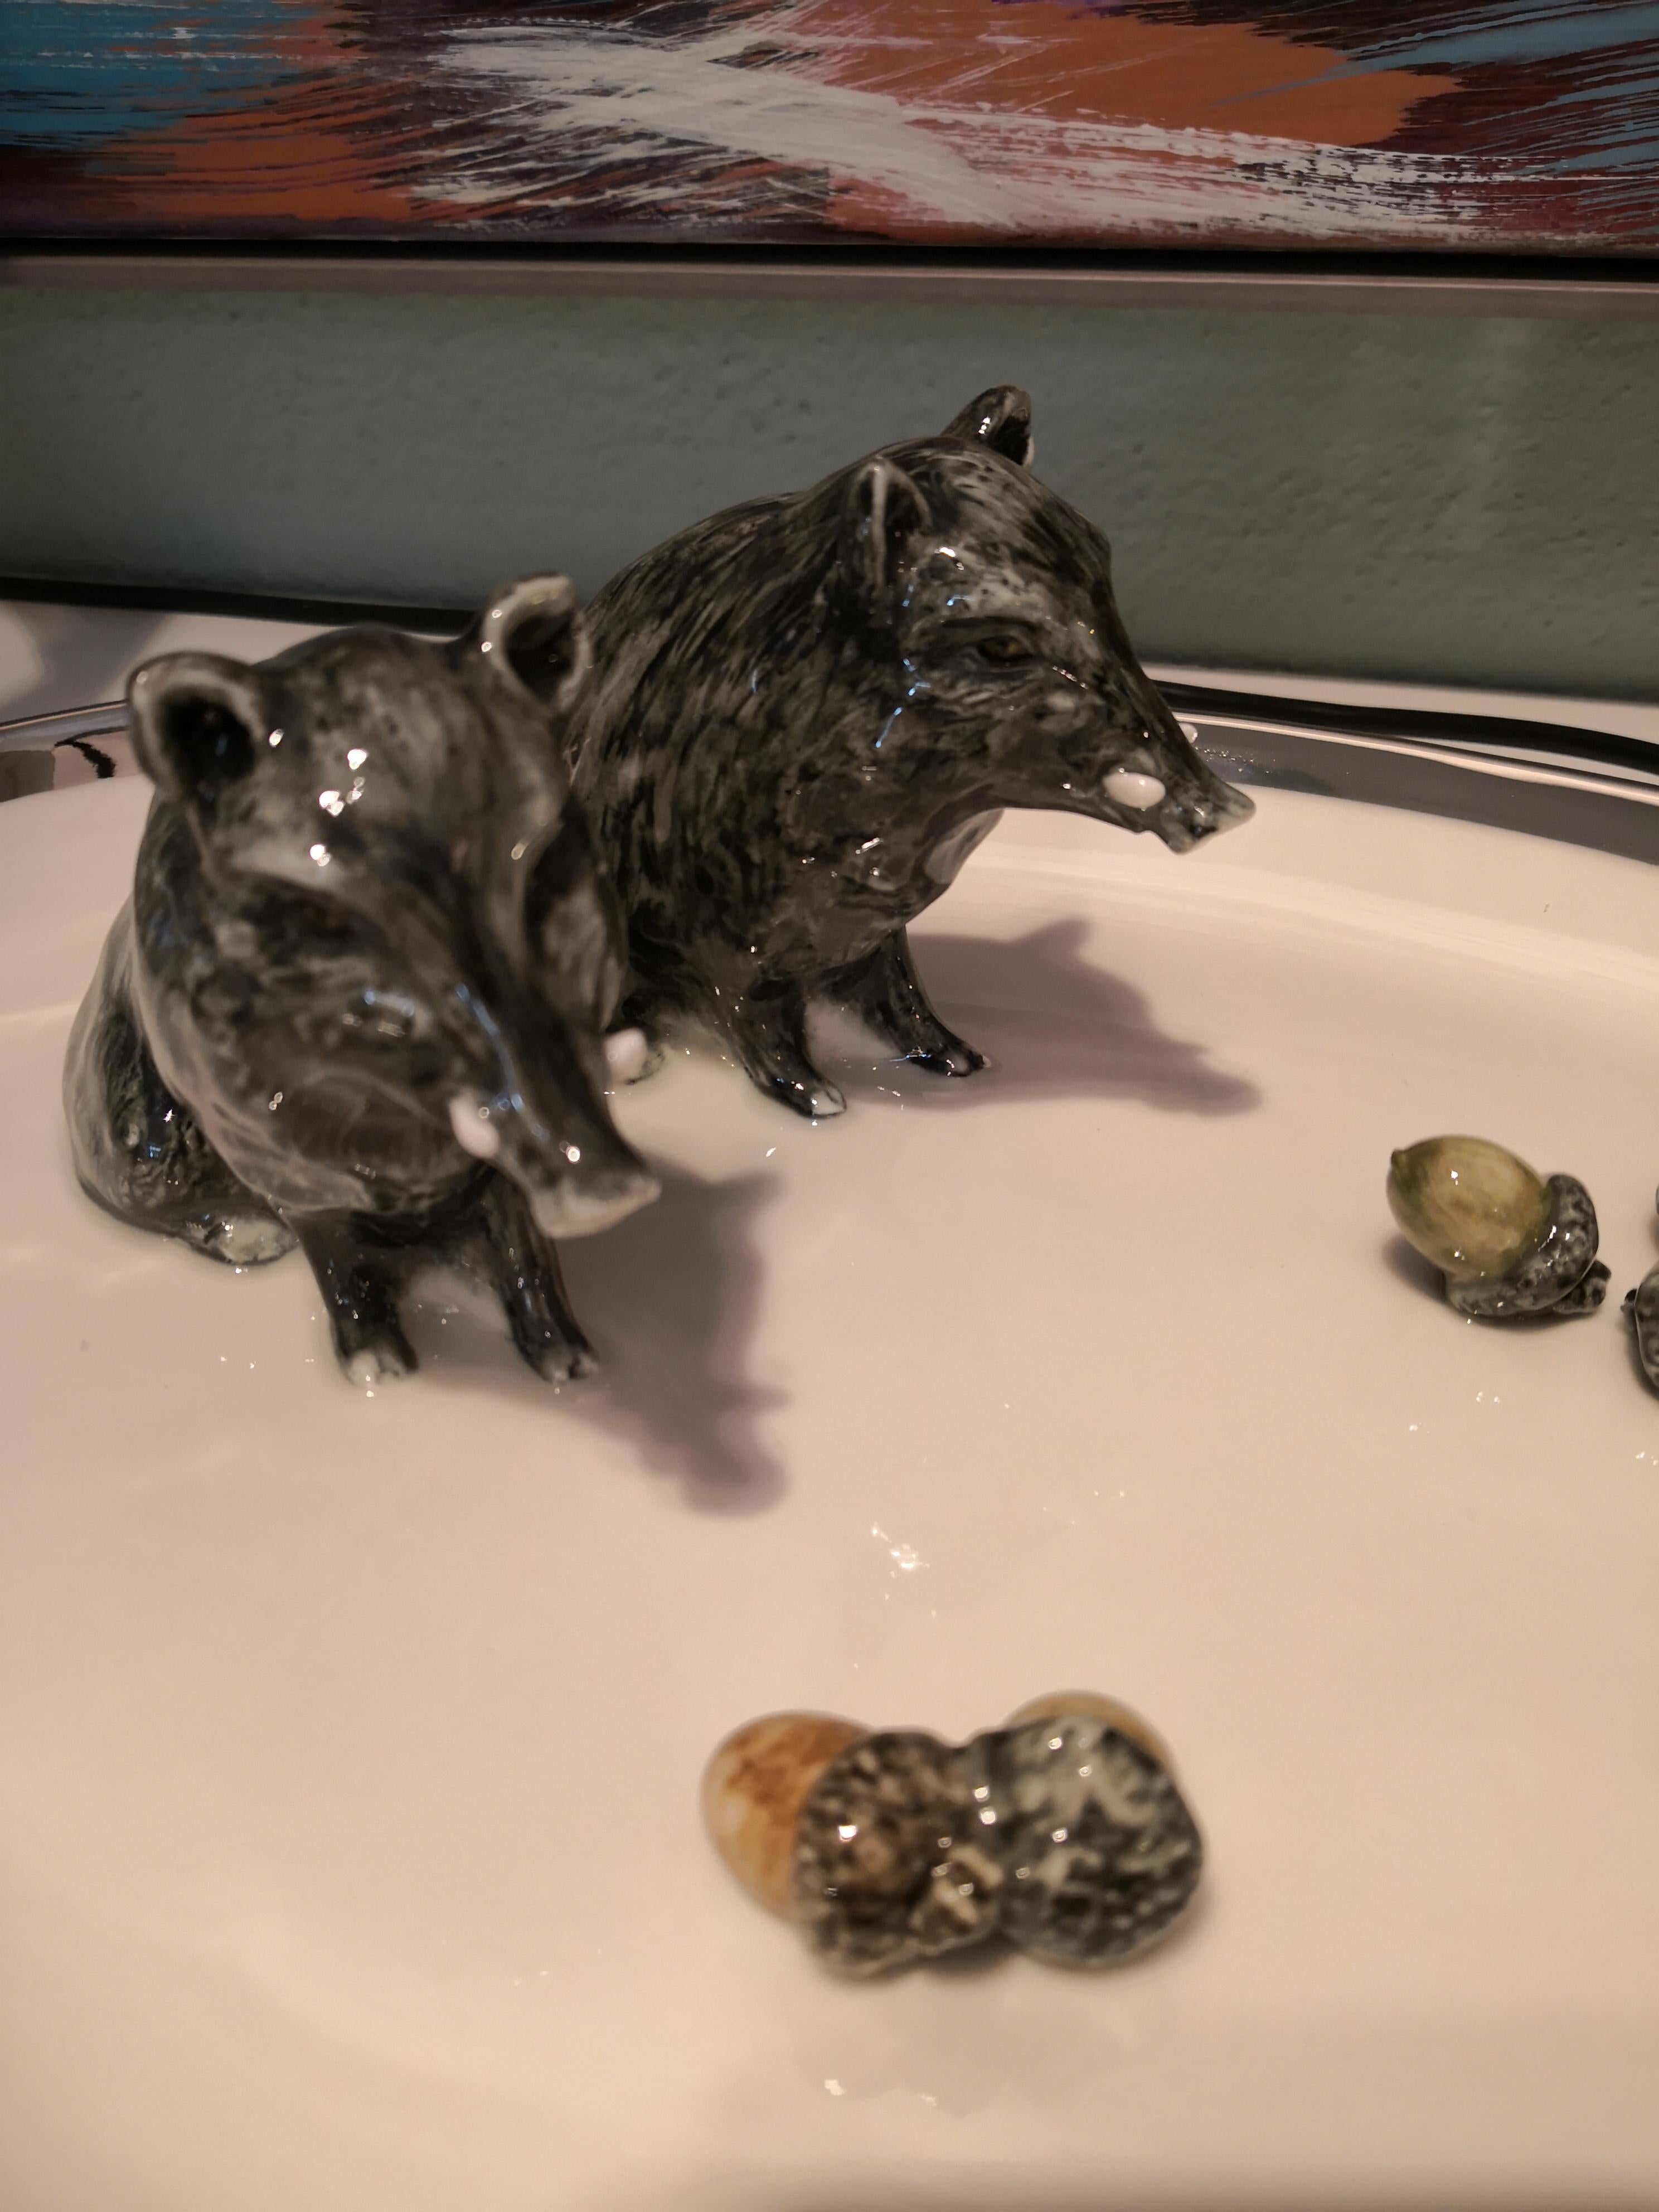 Completely handmade and hands-free painted large oval porcelain plate for decoration. Two natural moulded porcelain figures wild boars are sitting on the side decorated with fixed oaks on the porcelain plate. The plate is rimed with a platinum line.